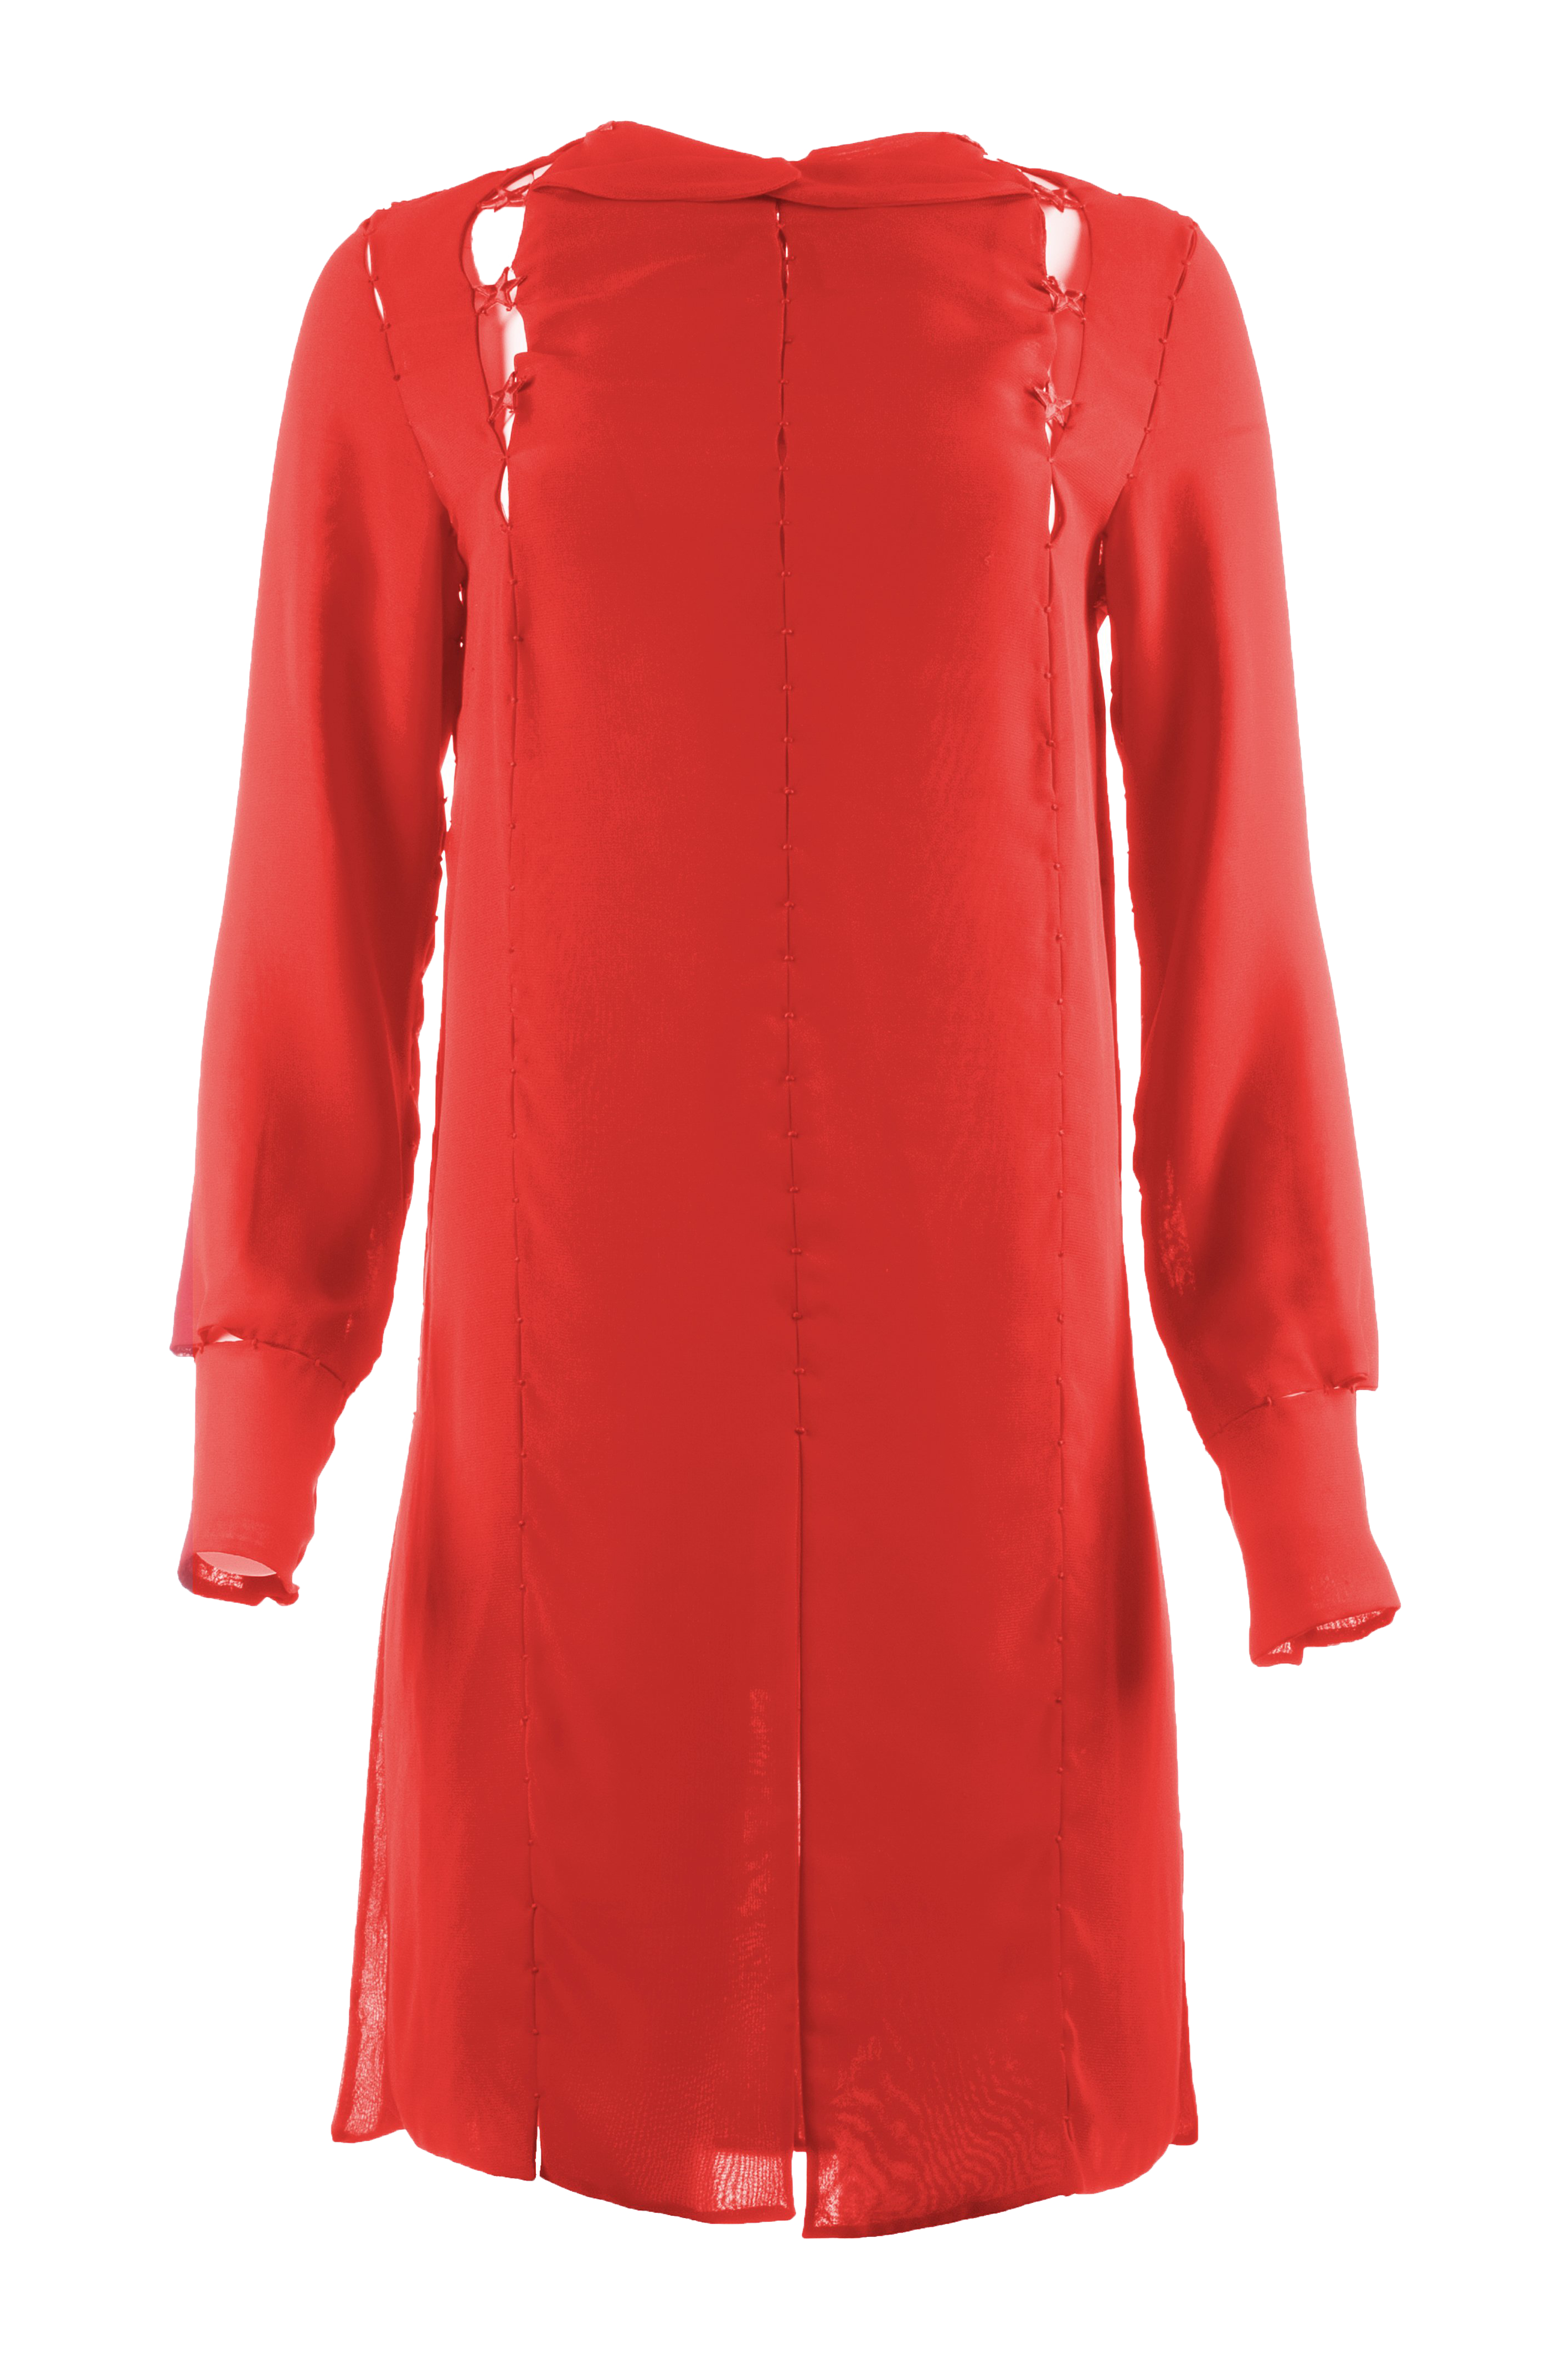 Long Red Blouse A/W 17